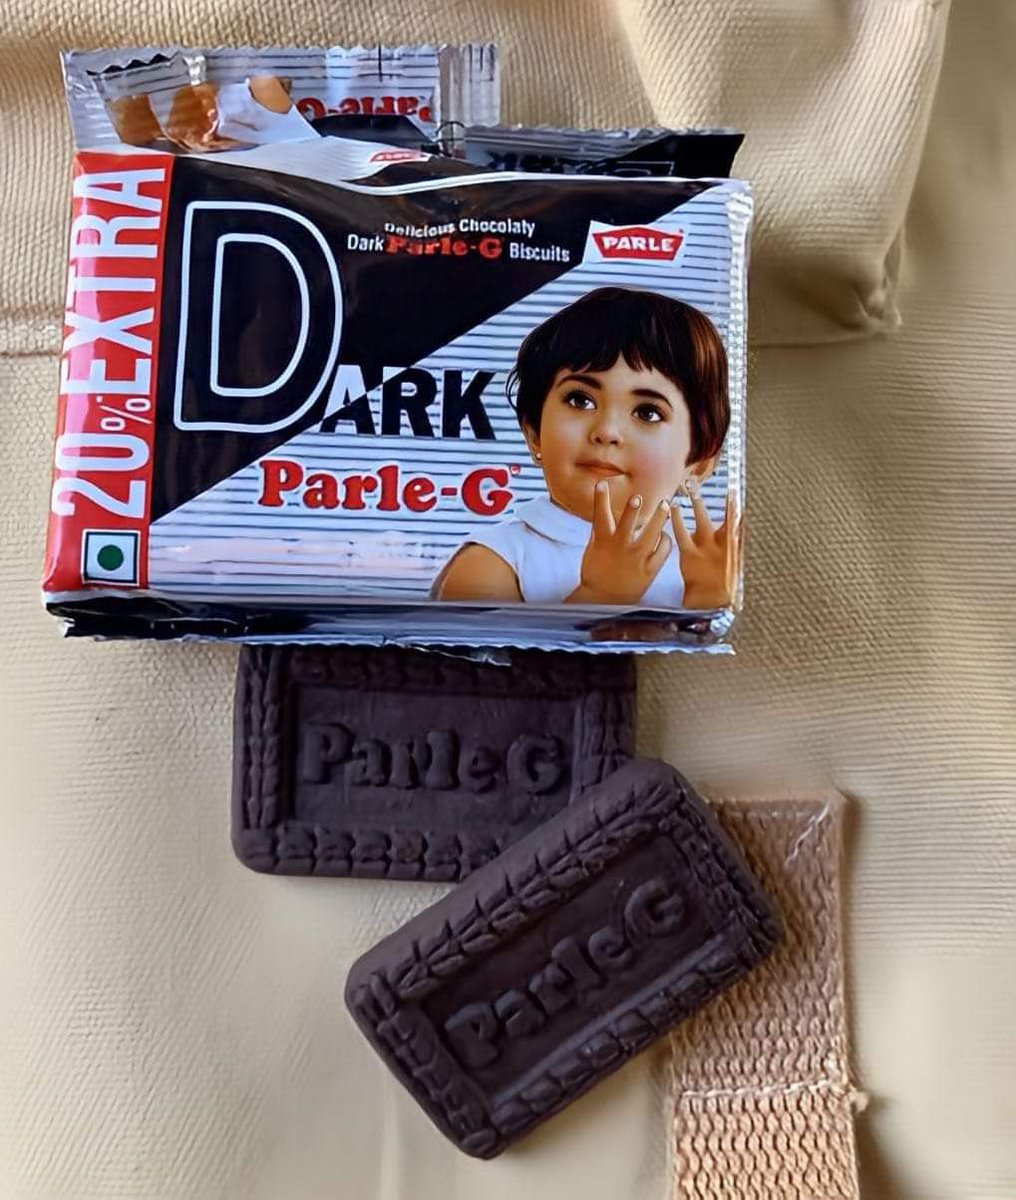 When Parle G worked so hard successfully for years that it got burnt out! 🥵